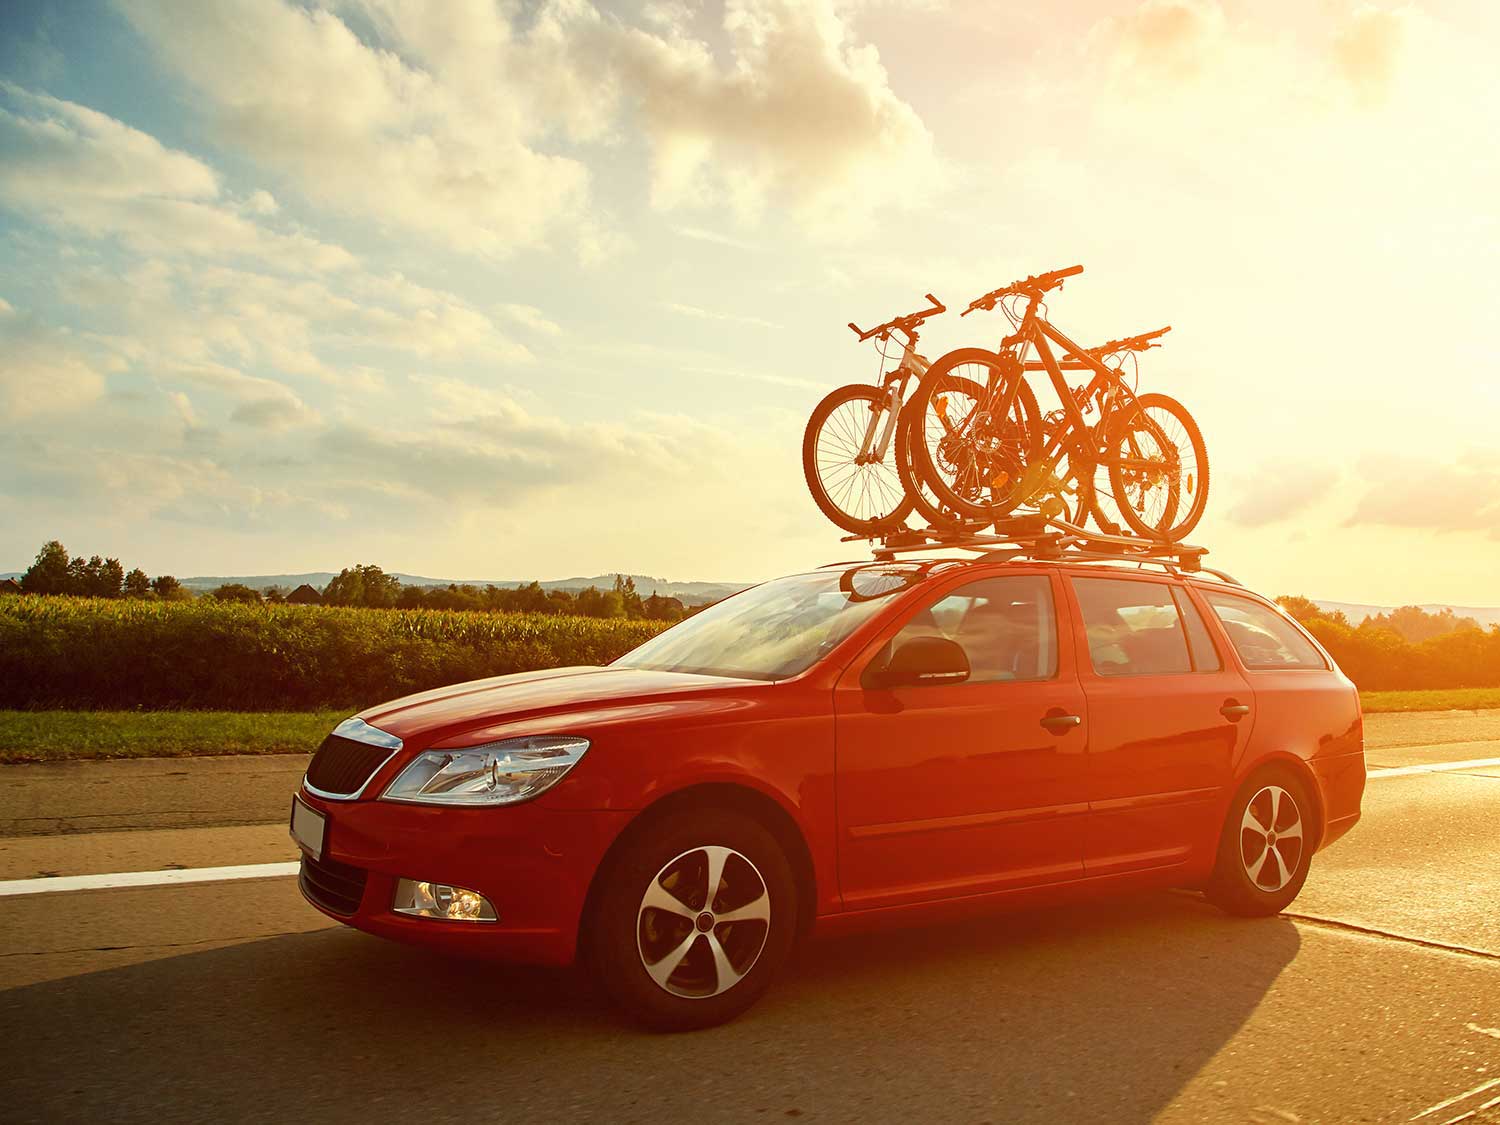 Bicycles mounted on top of car.